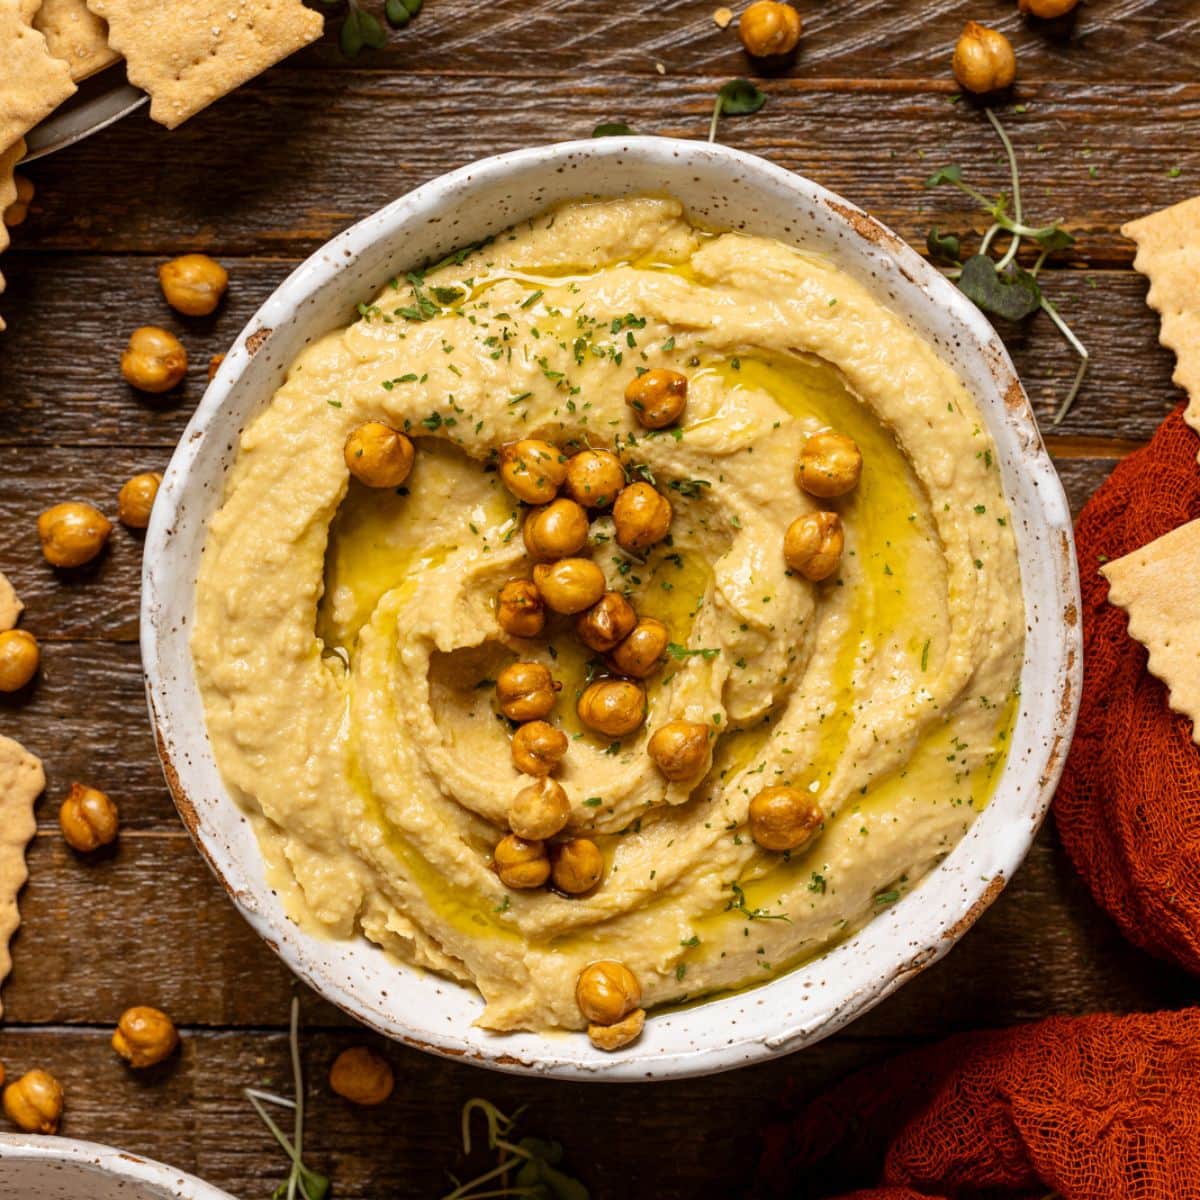 Bowl of hummus on a brown wood table.